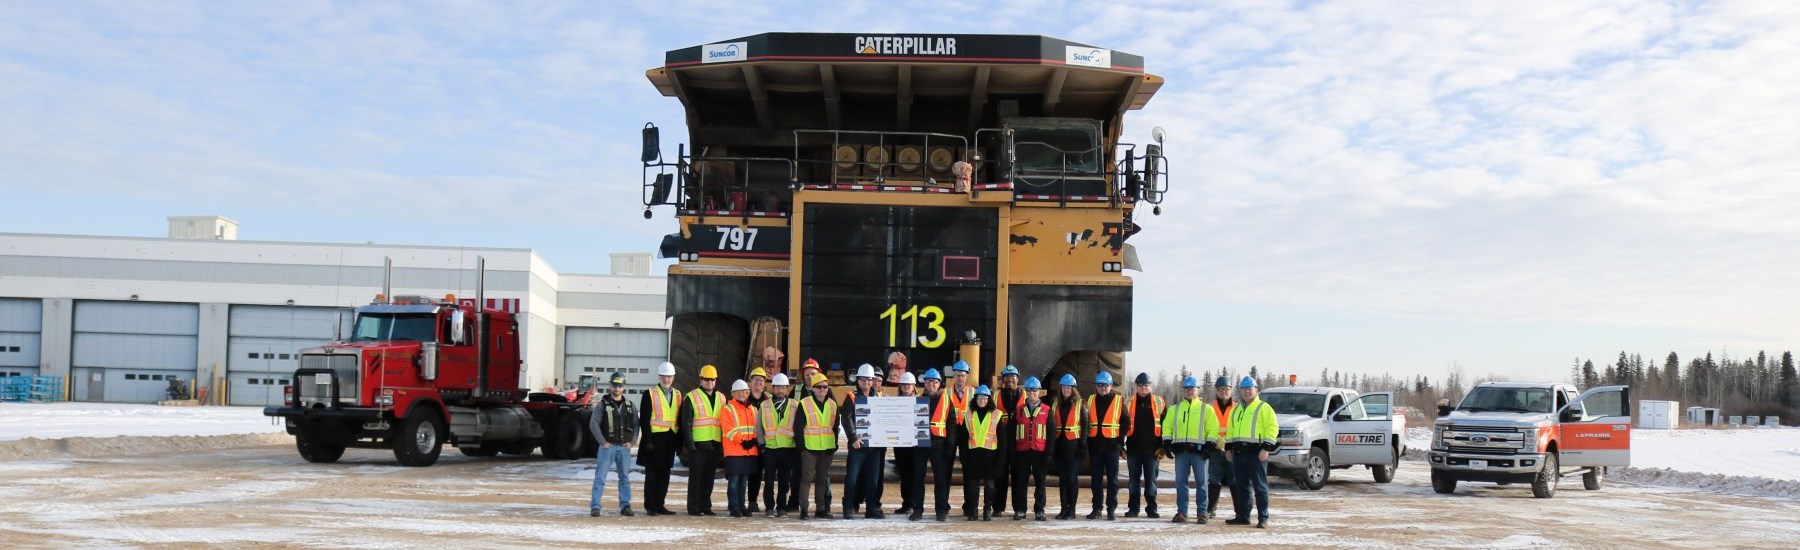 supporters standing in front of donated haul truck